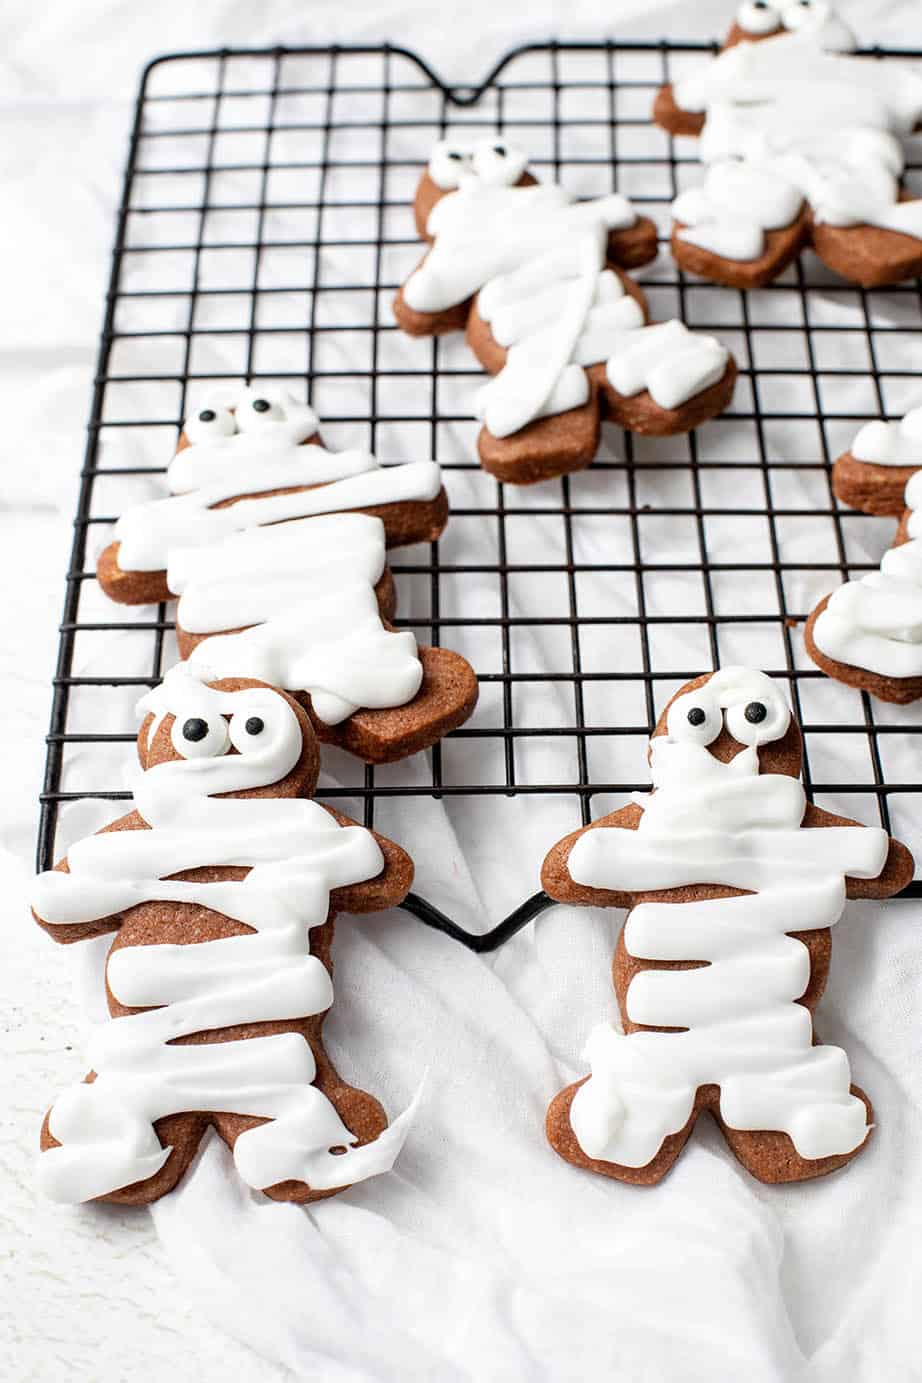 Gingerbread men decorated with icing to ;ook like mummy cookies for Halloween